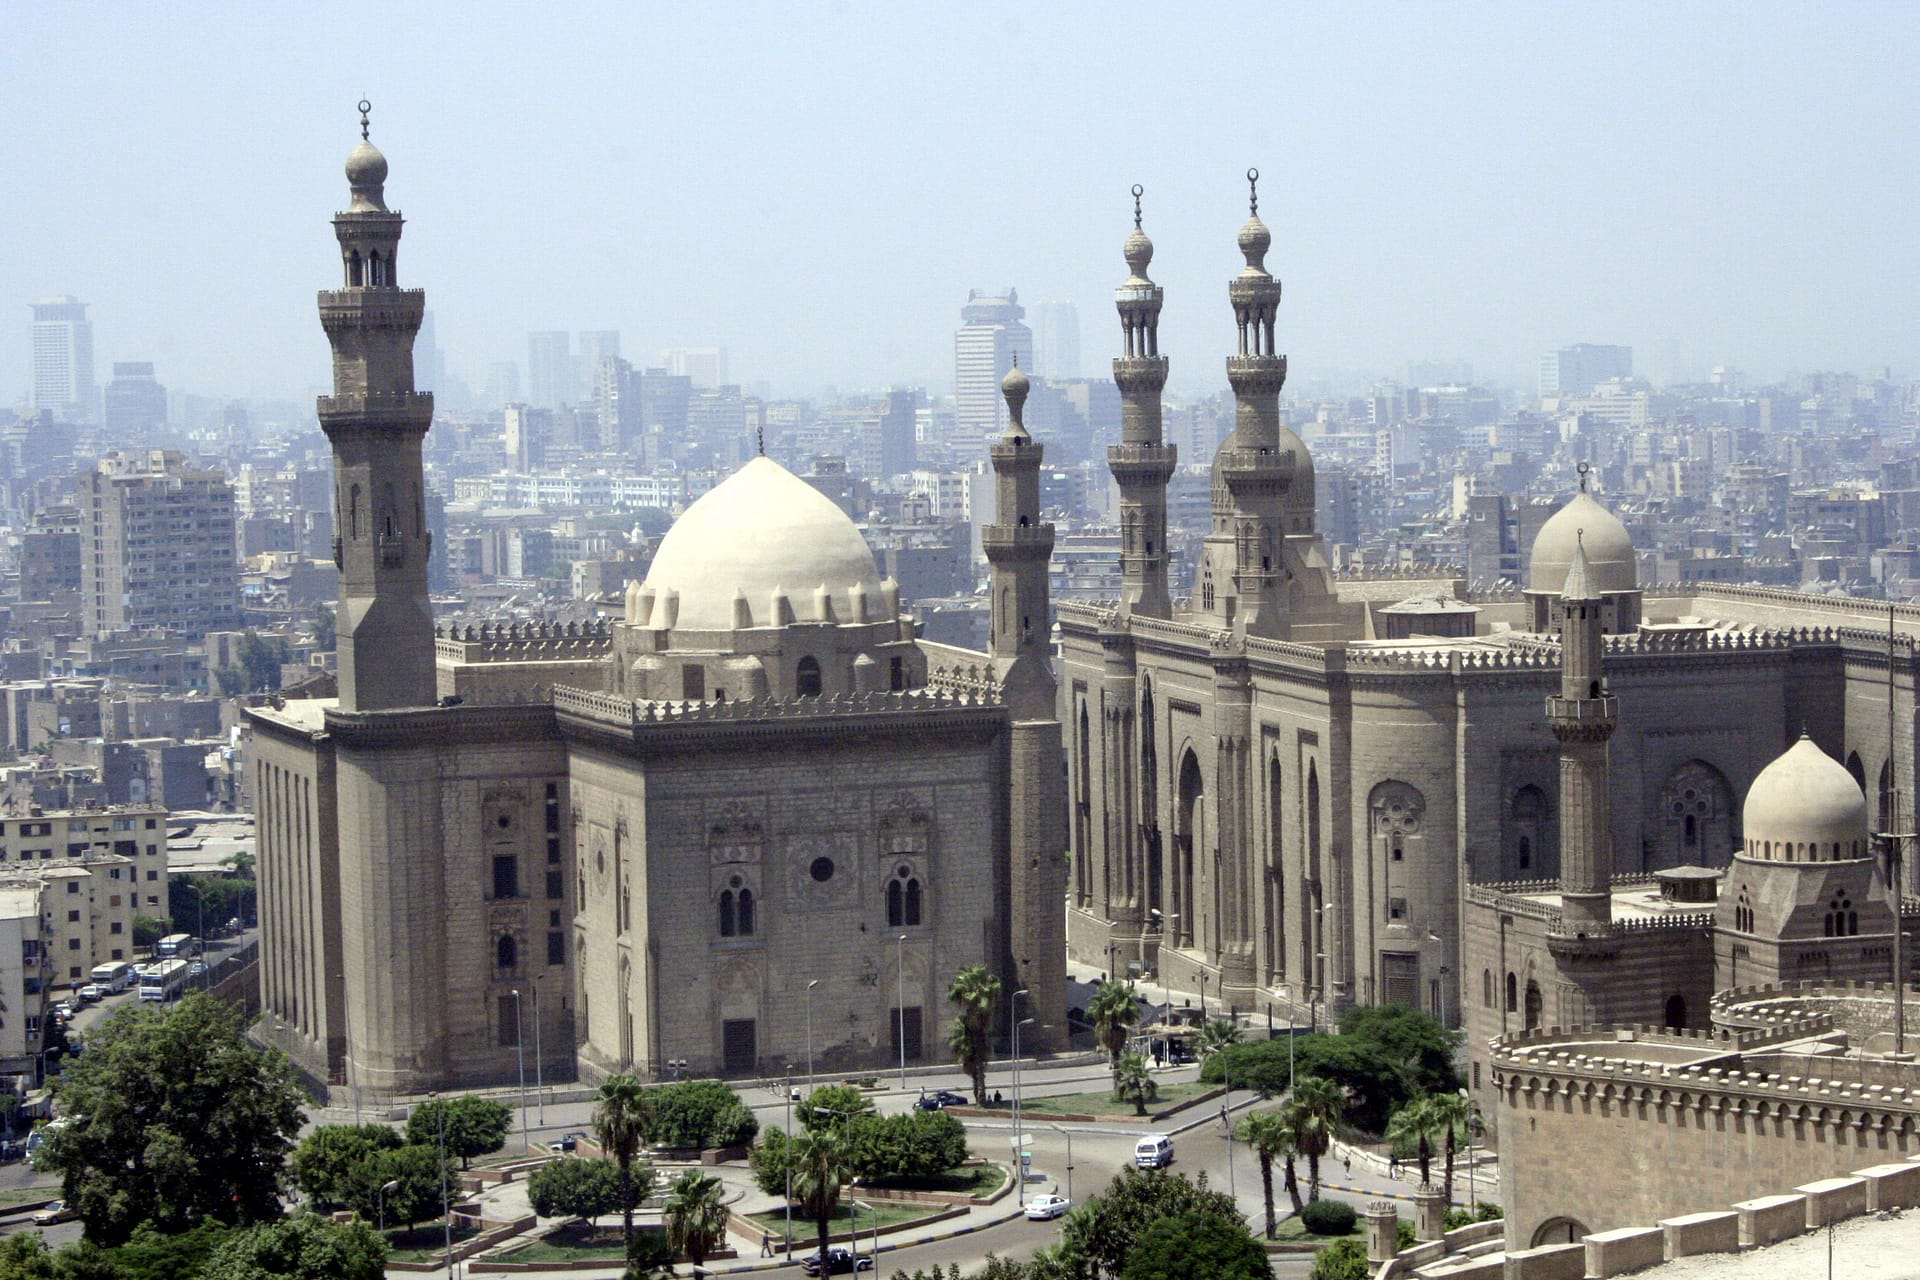 Demolition in Cairo Threatens Art Center and Heritage Sites